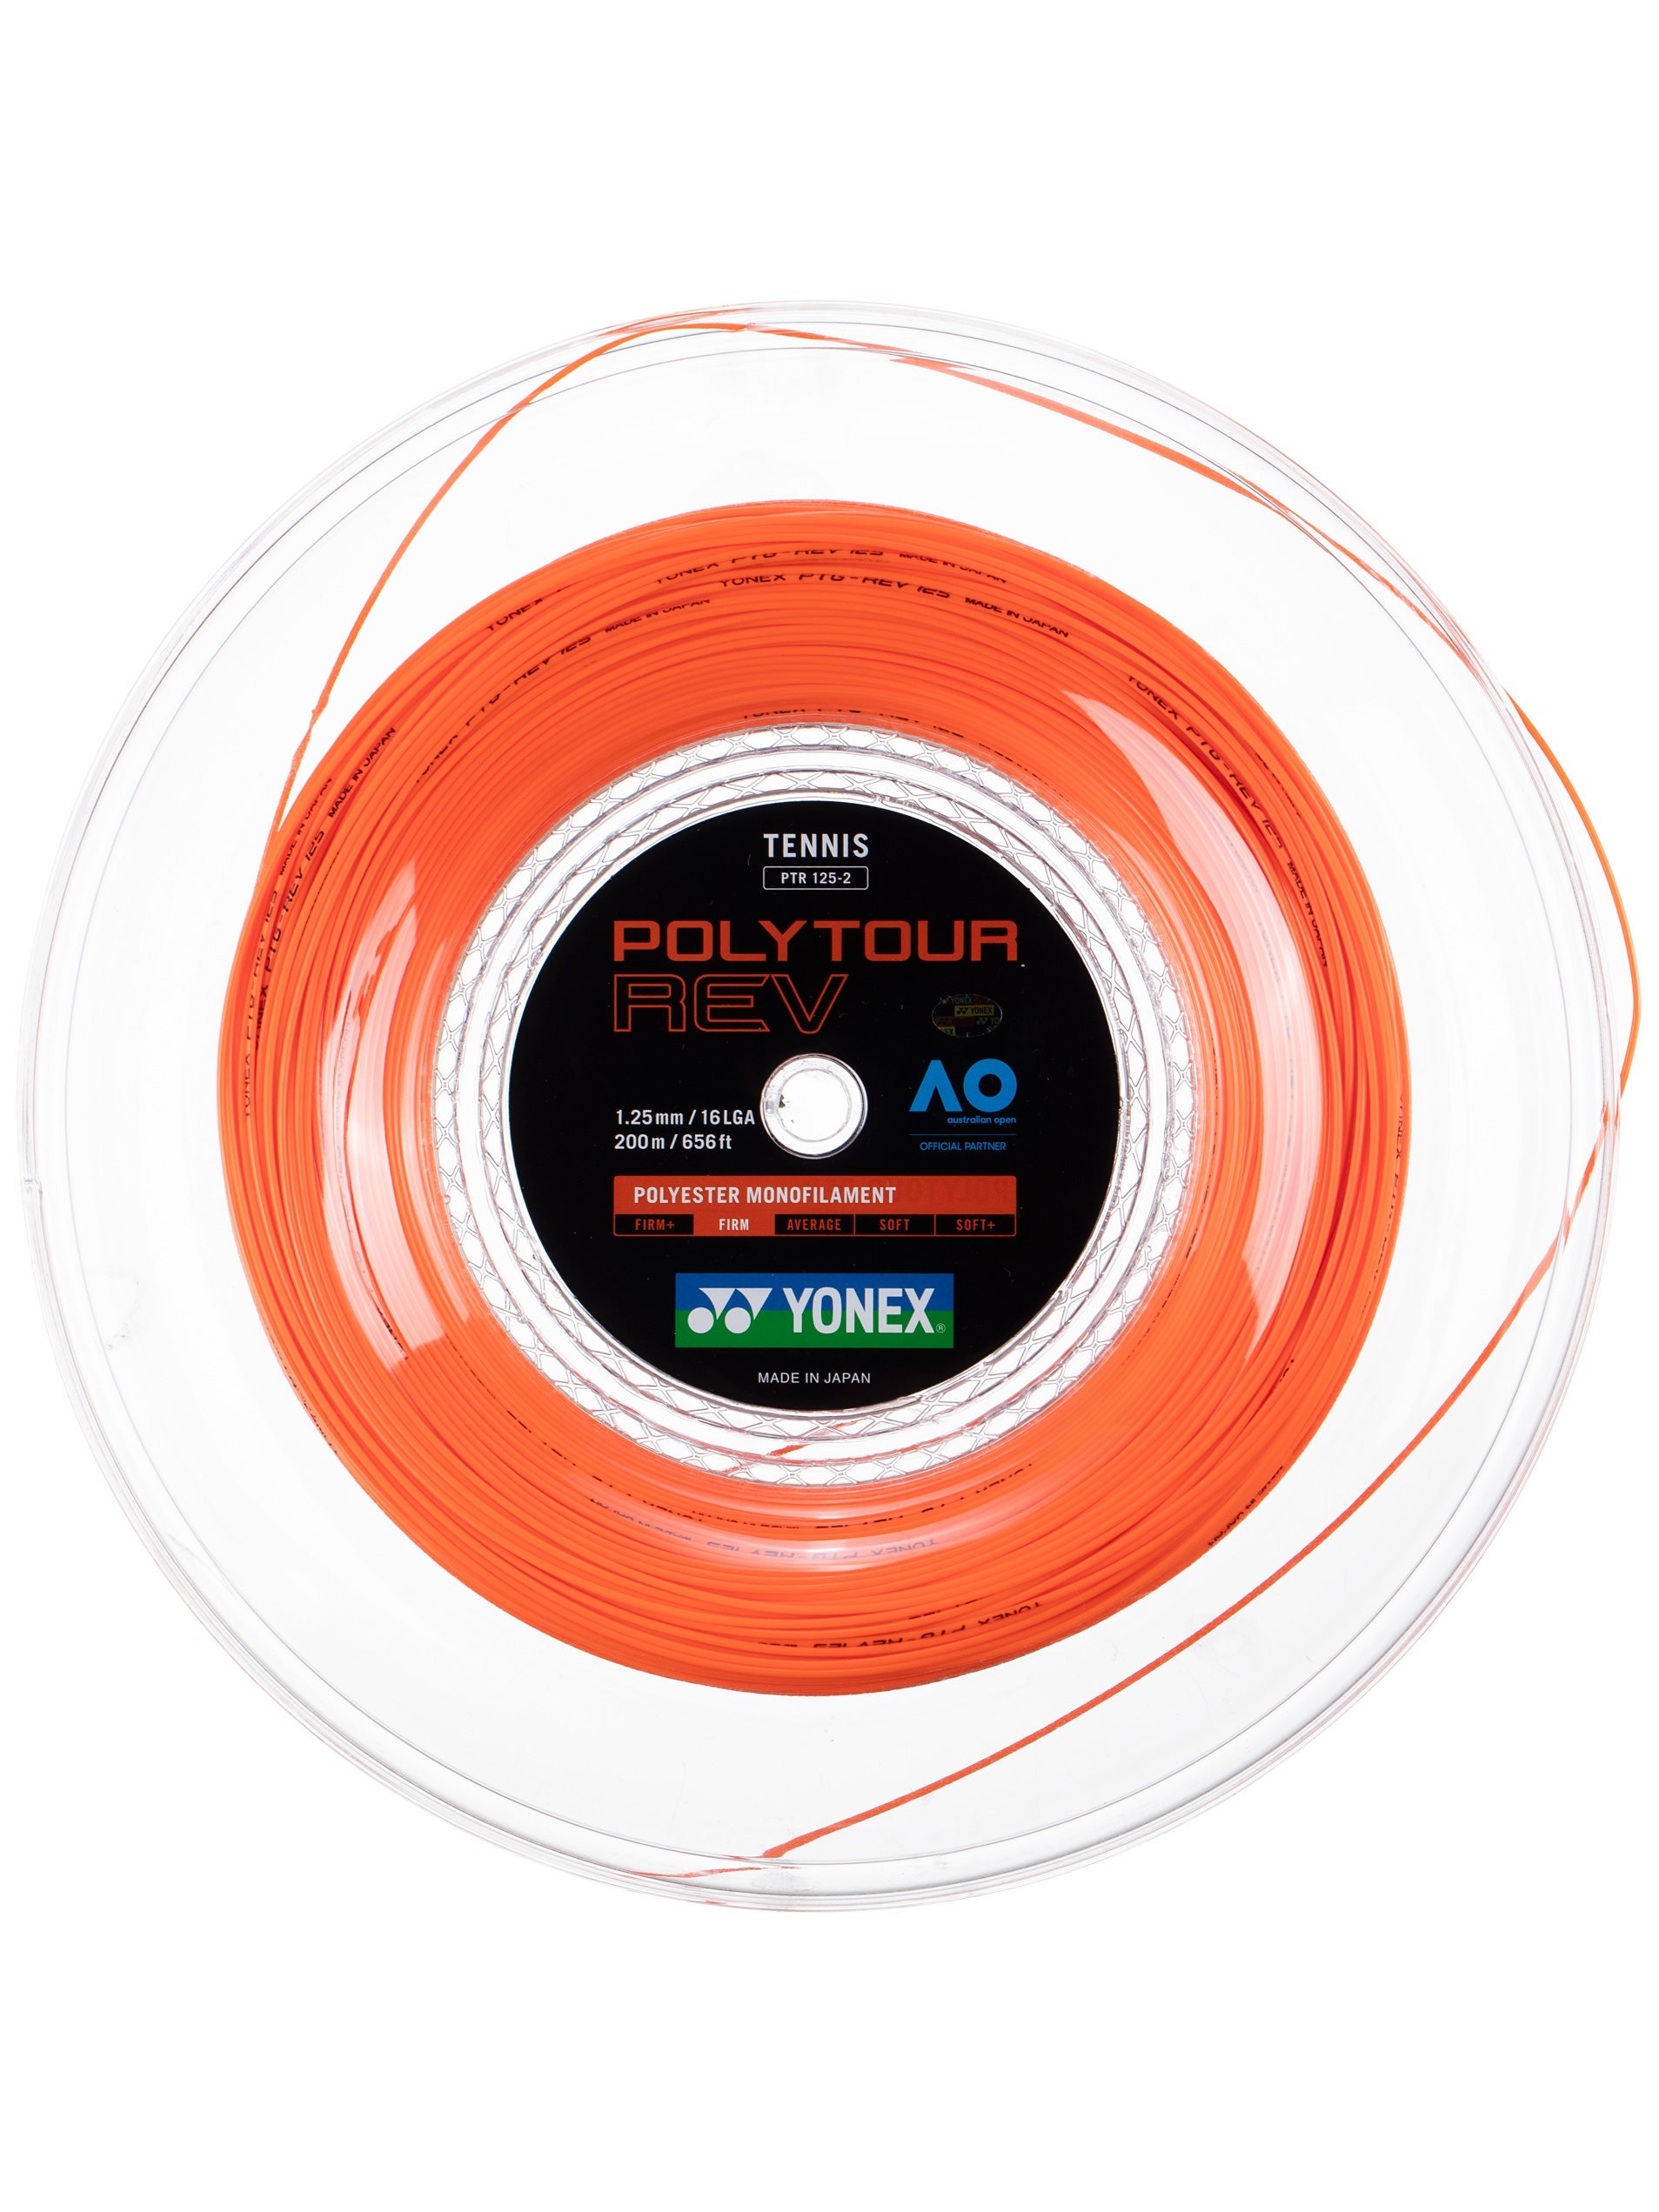 FREE CAP! Topspin CYBER FLASH String 17G 1.25mm Reel Red Tennis Racquet String 